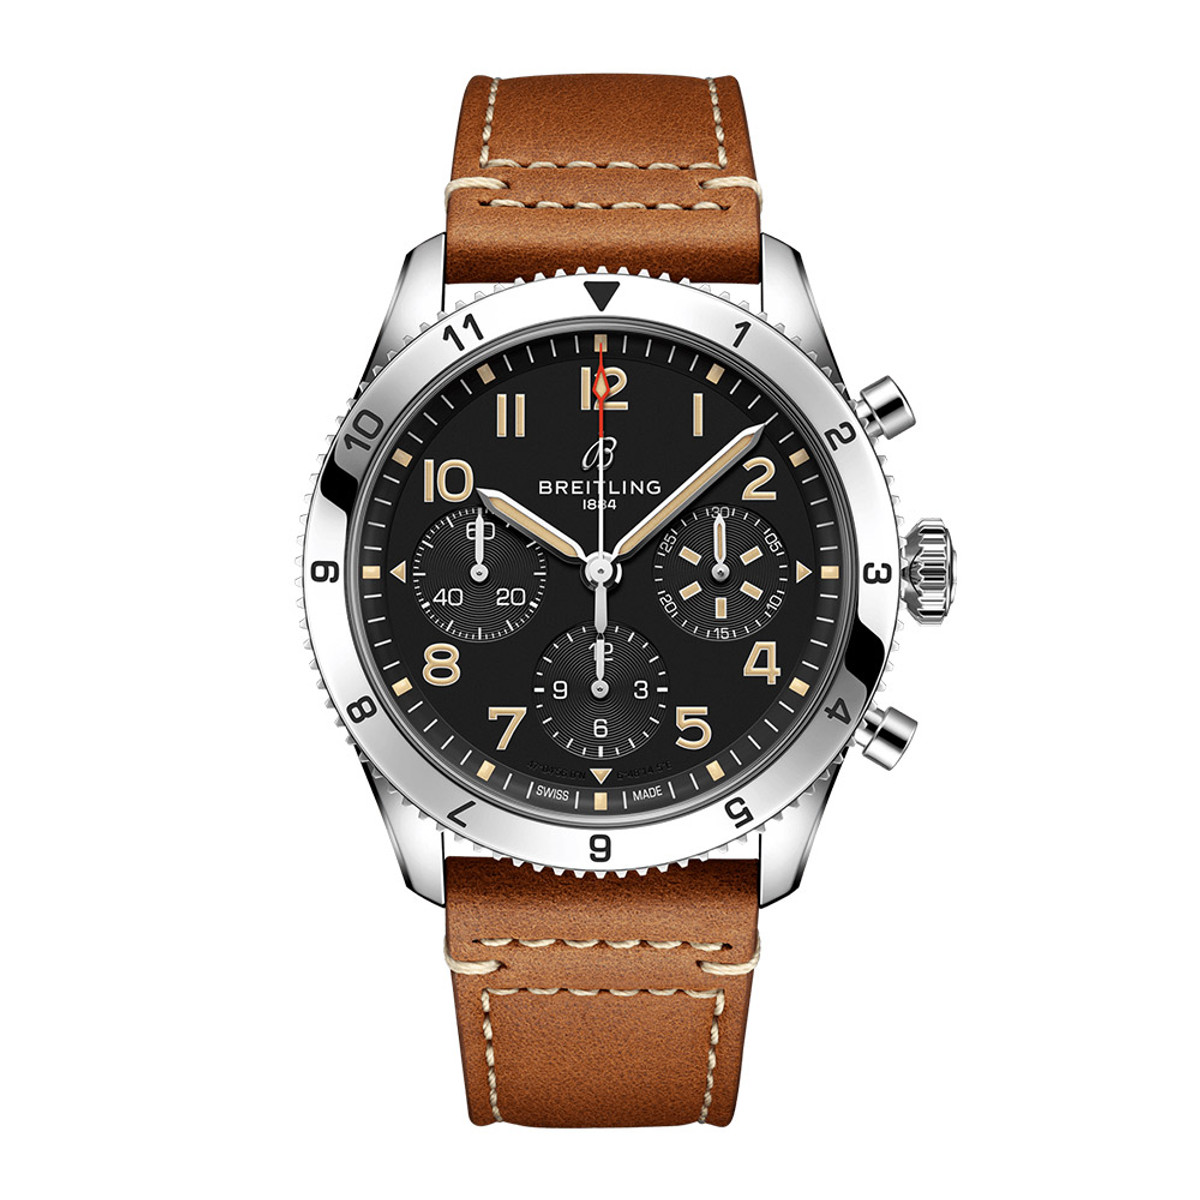 Breitling Classic AVI 42 P-51 Mustang Automatic Chronograph A233803A1B1X1-53393 Product Image